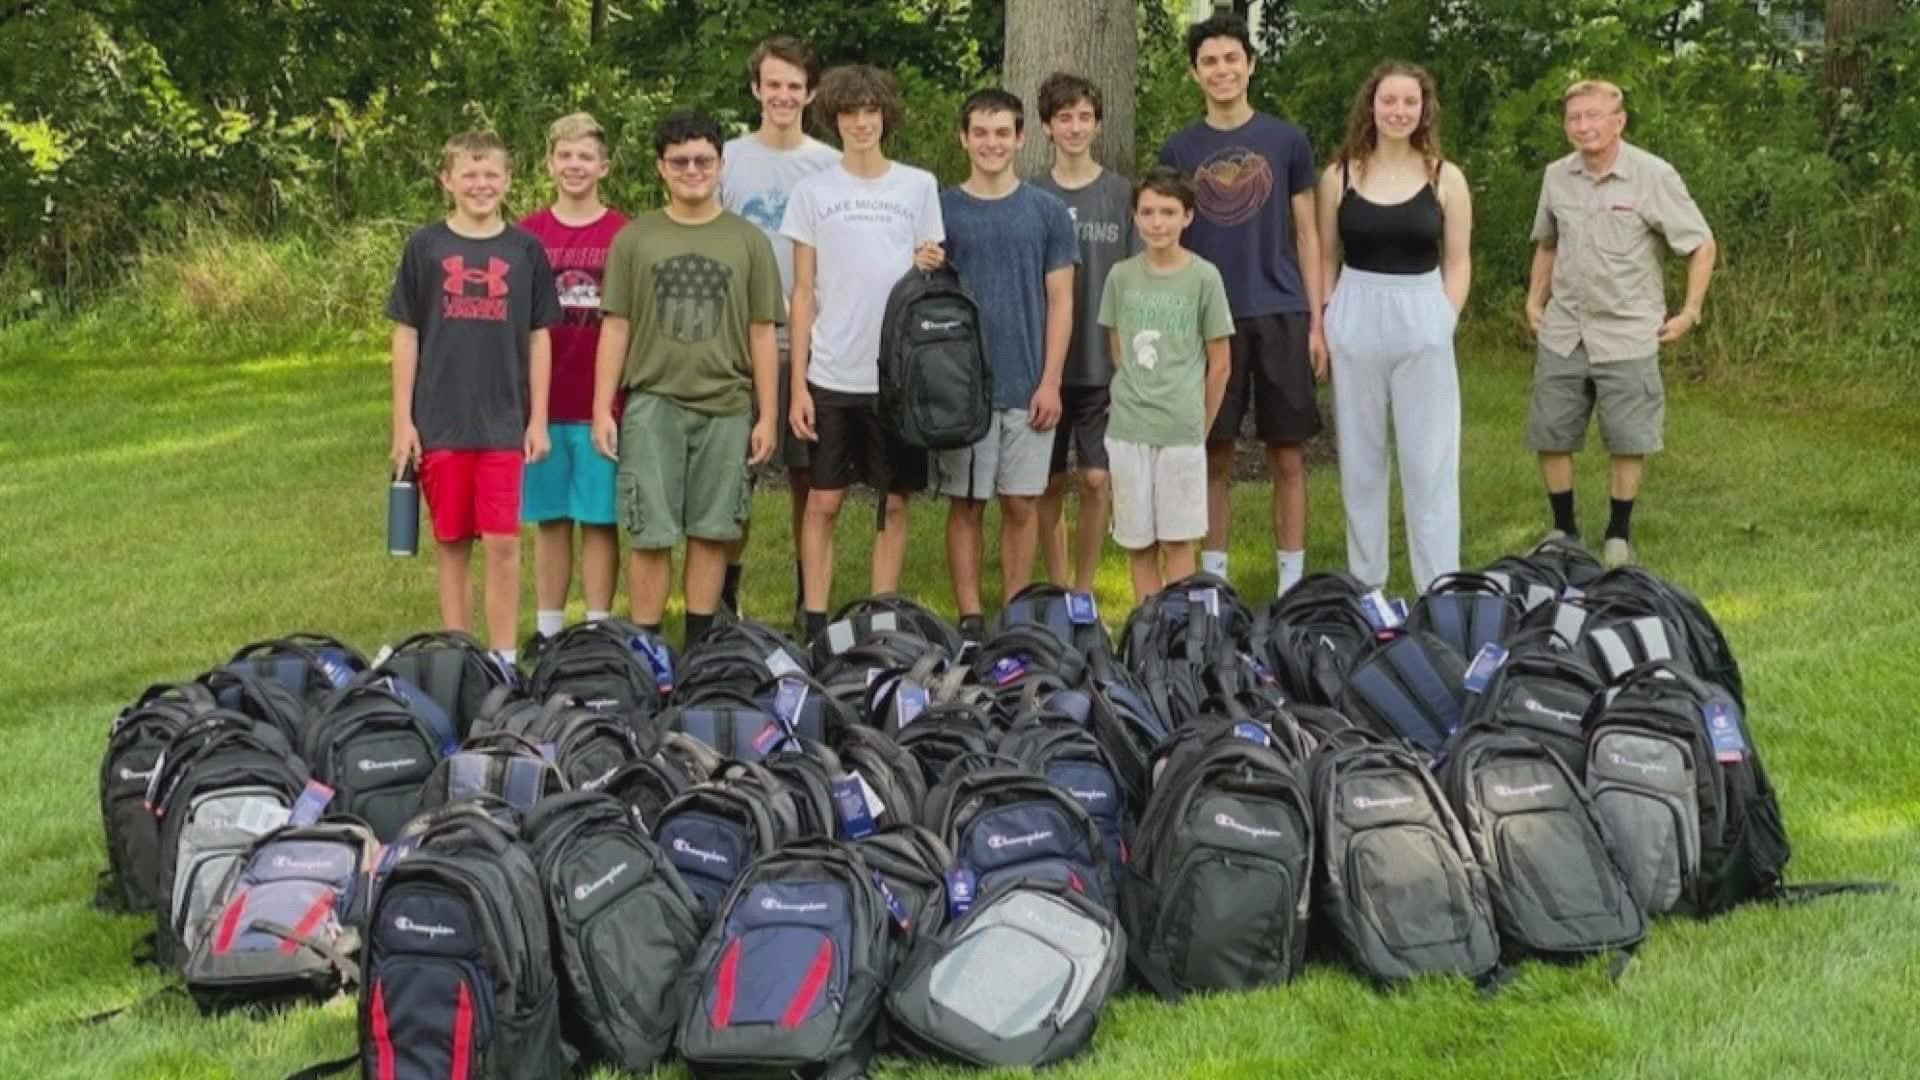 Gracin Chaprnka's Eagle Scout project is bringing awareness about youth homelessness, so he's donating 100 backpacks to GRPS Homeless Program.